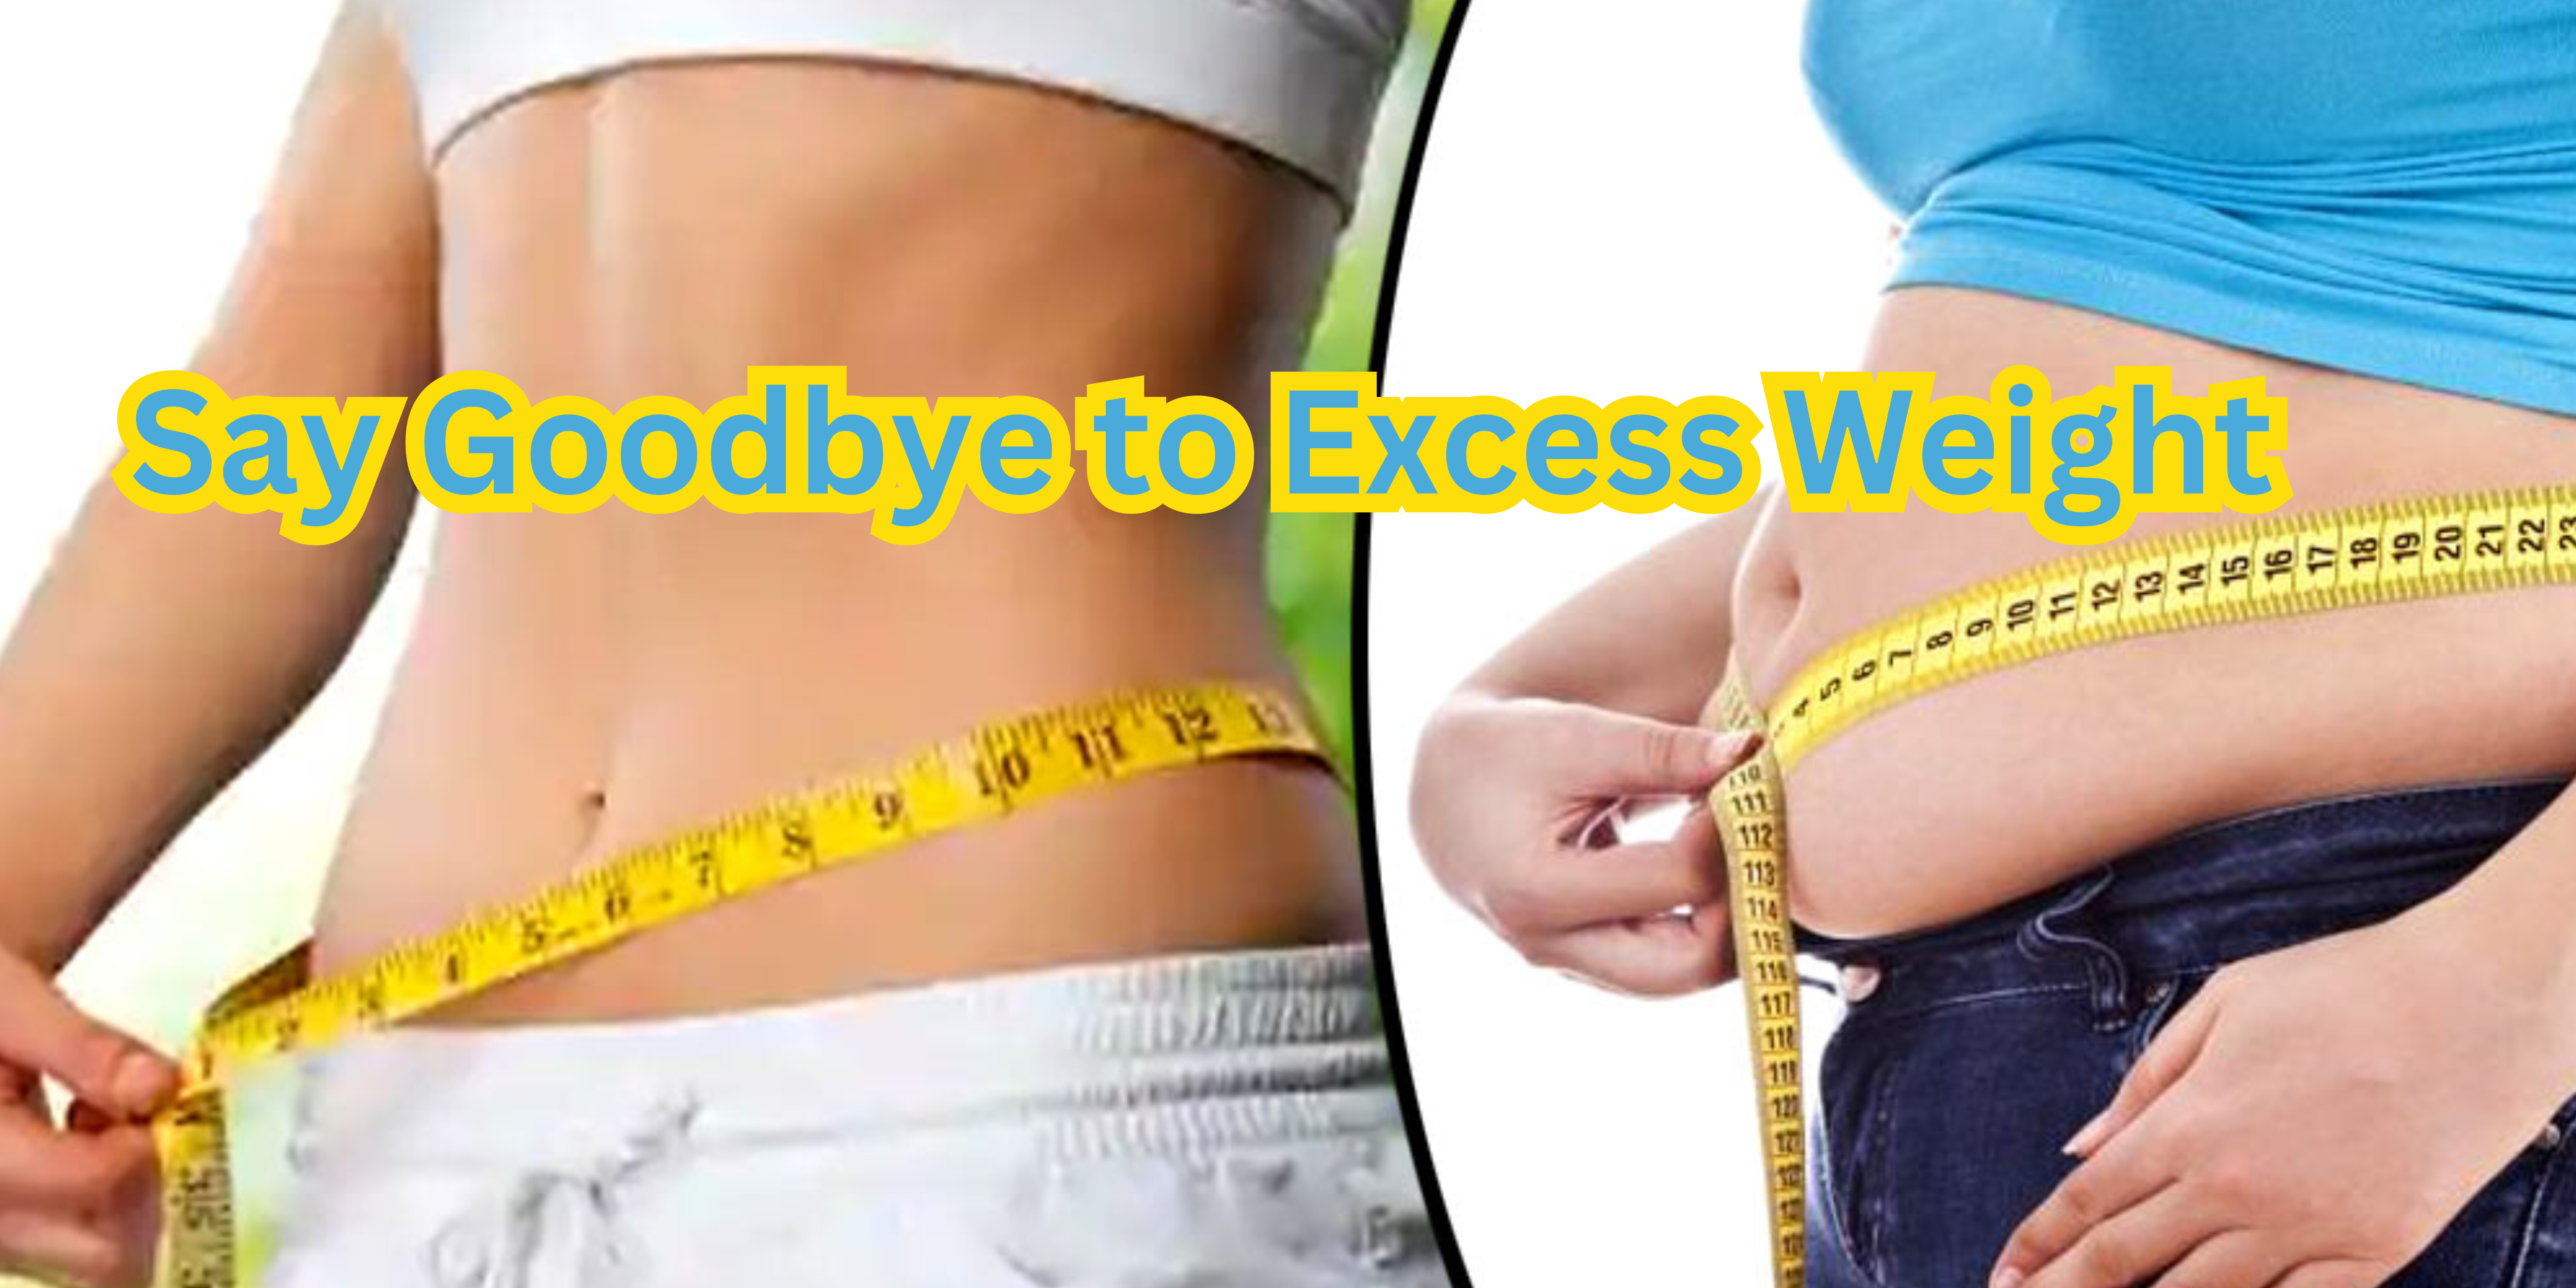 Goodbye to Excess Weight